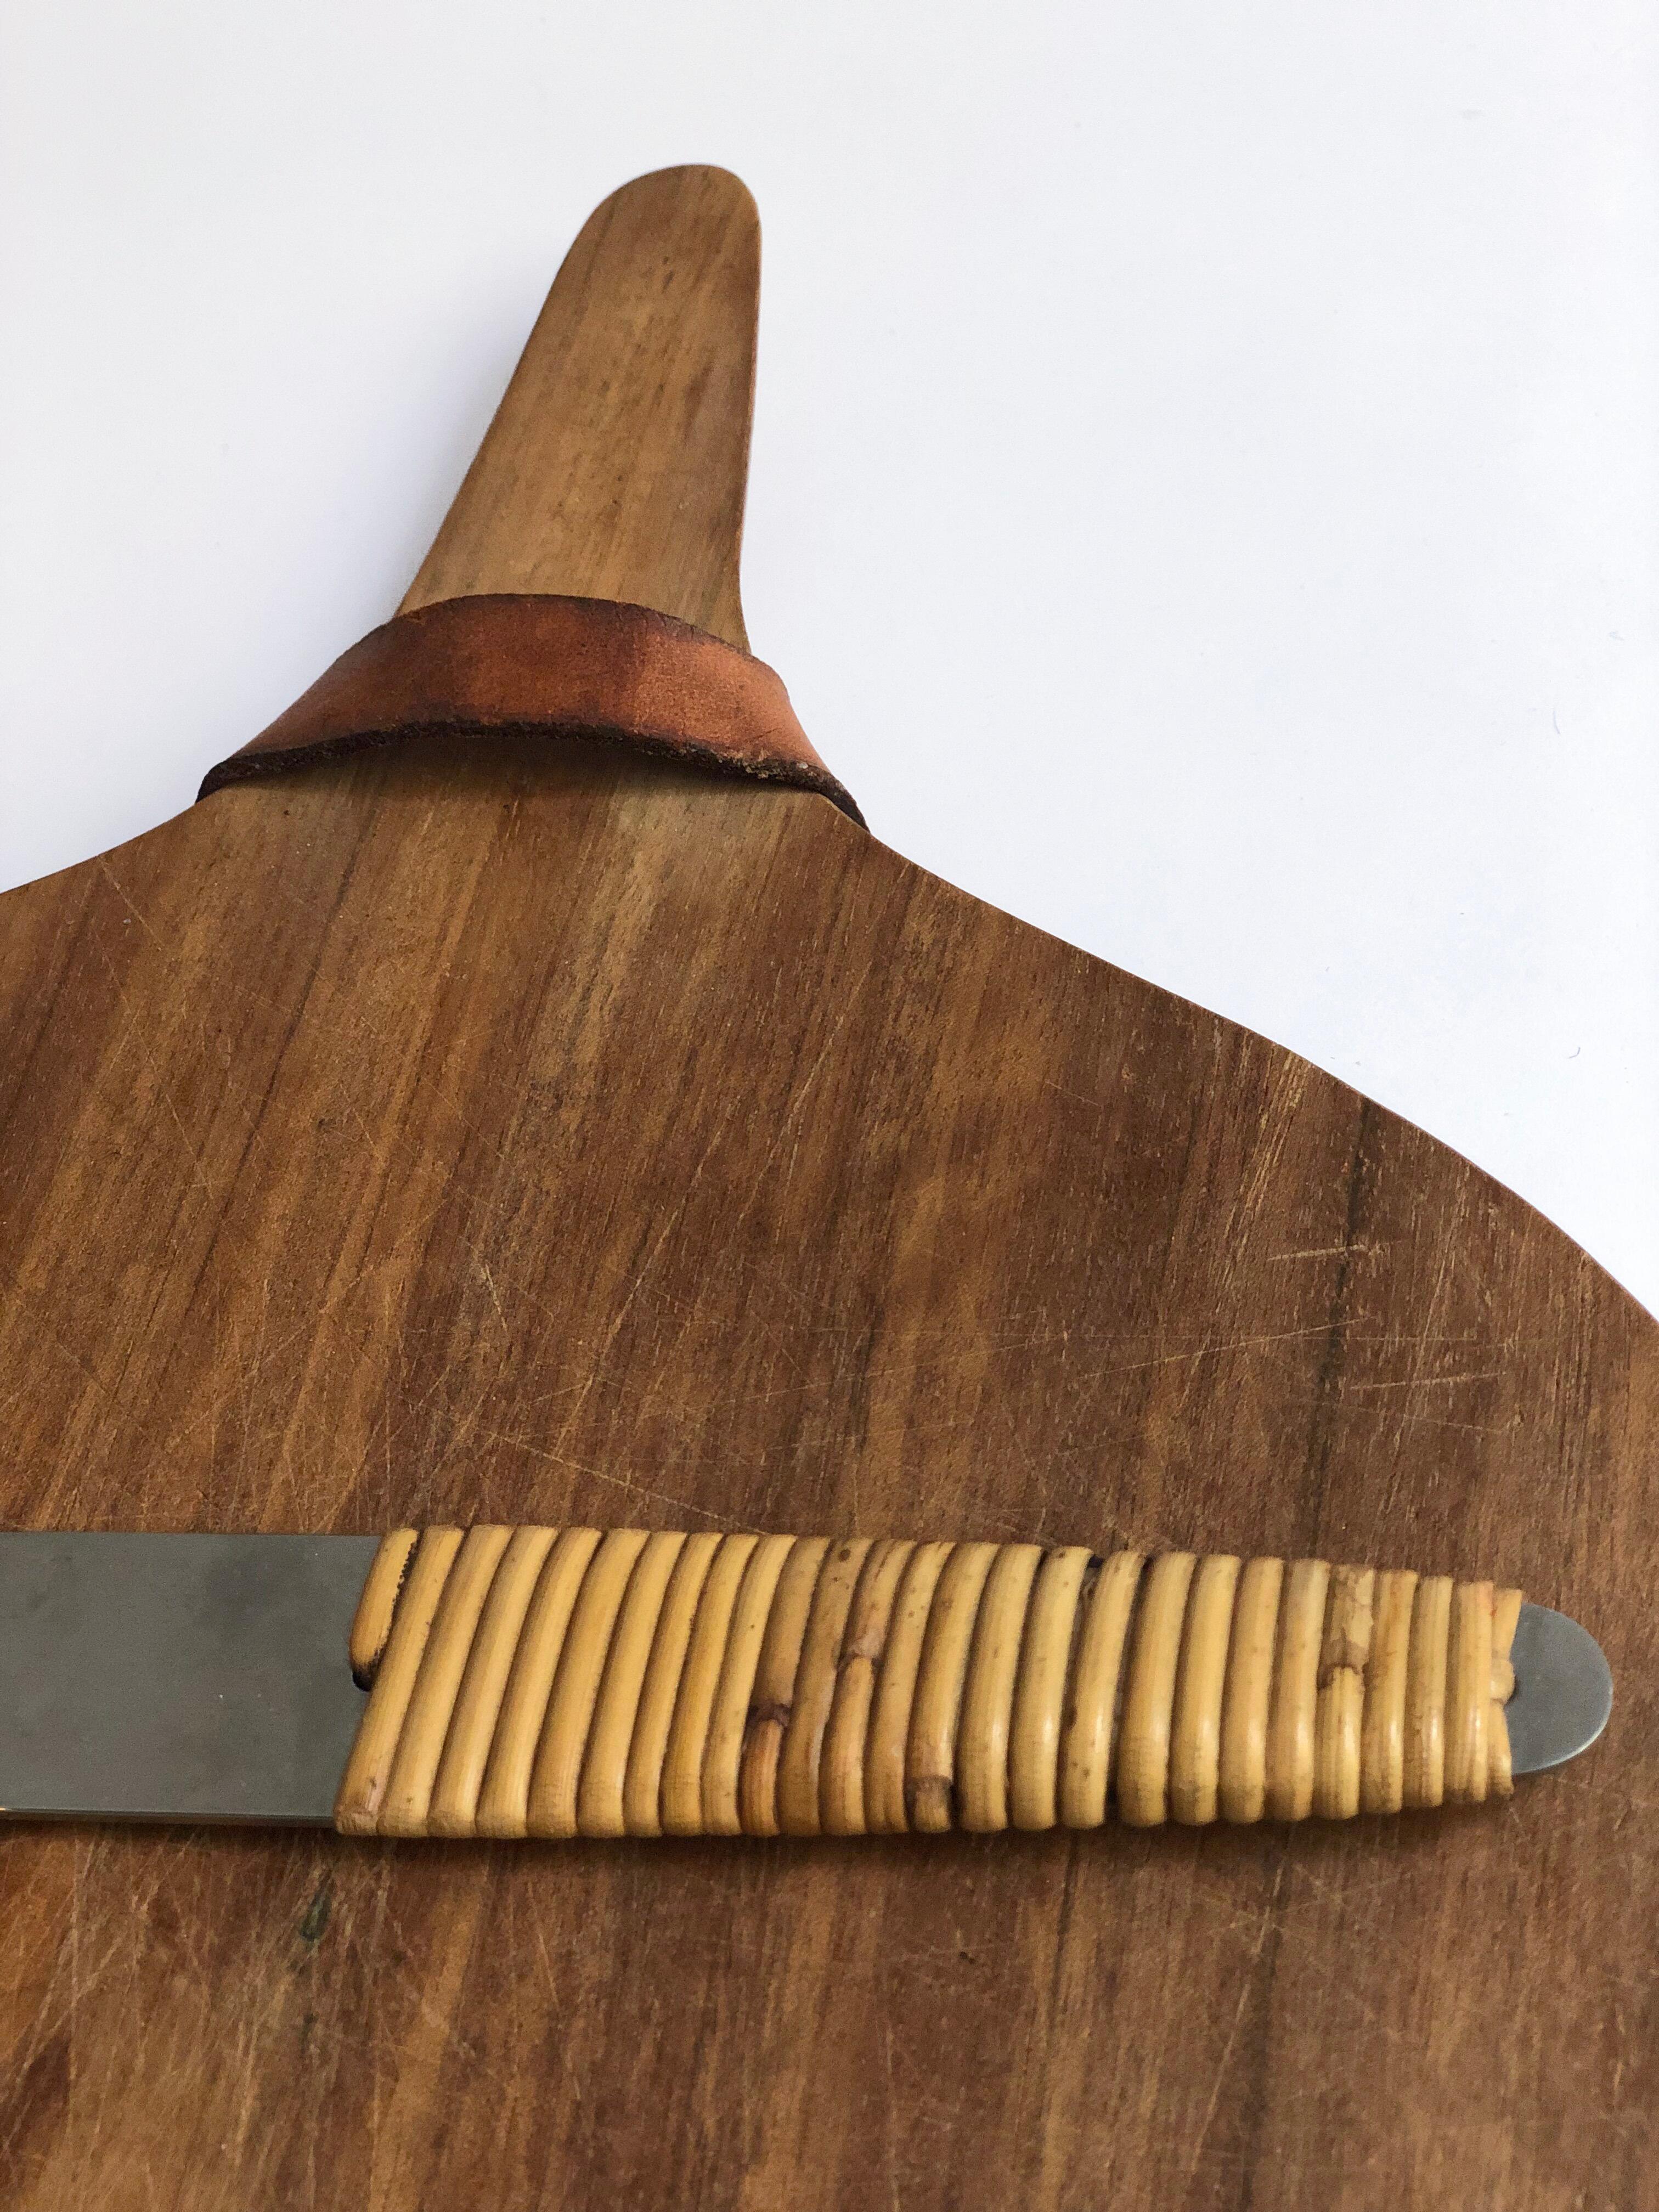 Mid-20th Century Carl Aubock Cutting Board and Knife For Sale